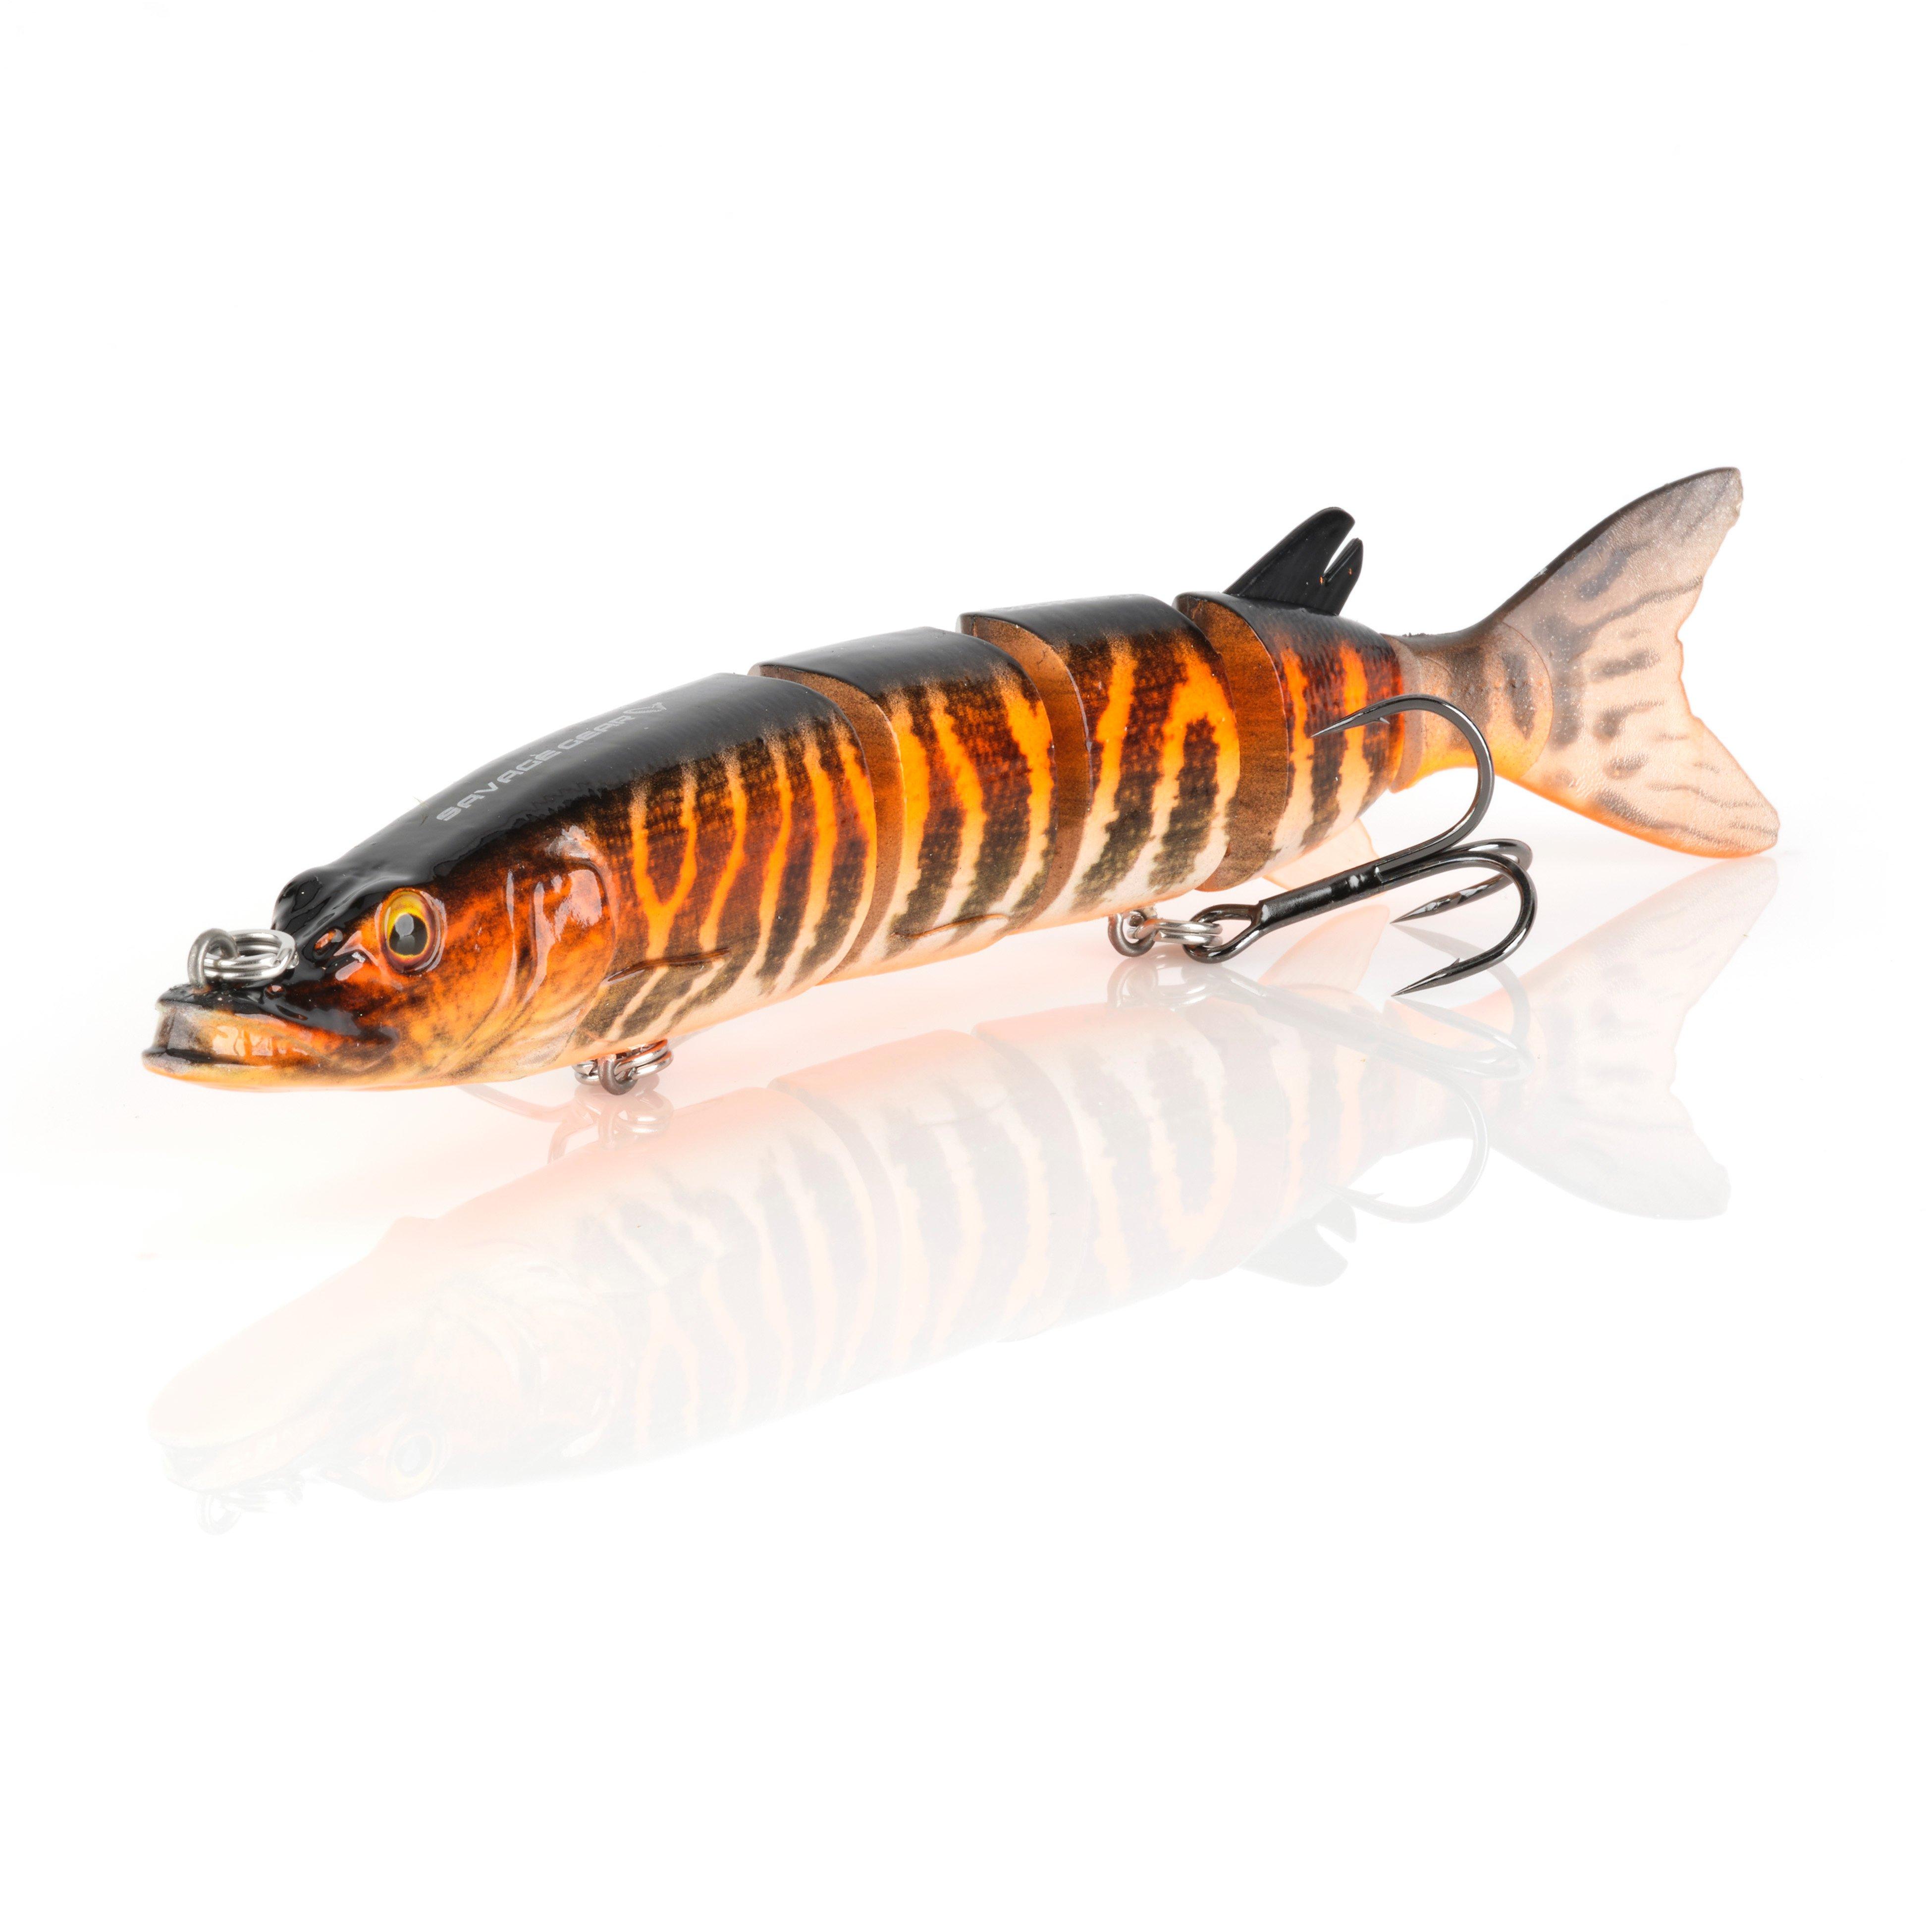 Savage Gear 3d Shrimp Weighted Softbait Lures, 3.5 Inch , 5 Inch, 2 Pcs  Per Pack, 2 Jigheads Included at Rs 780.00, Fishing Lure